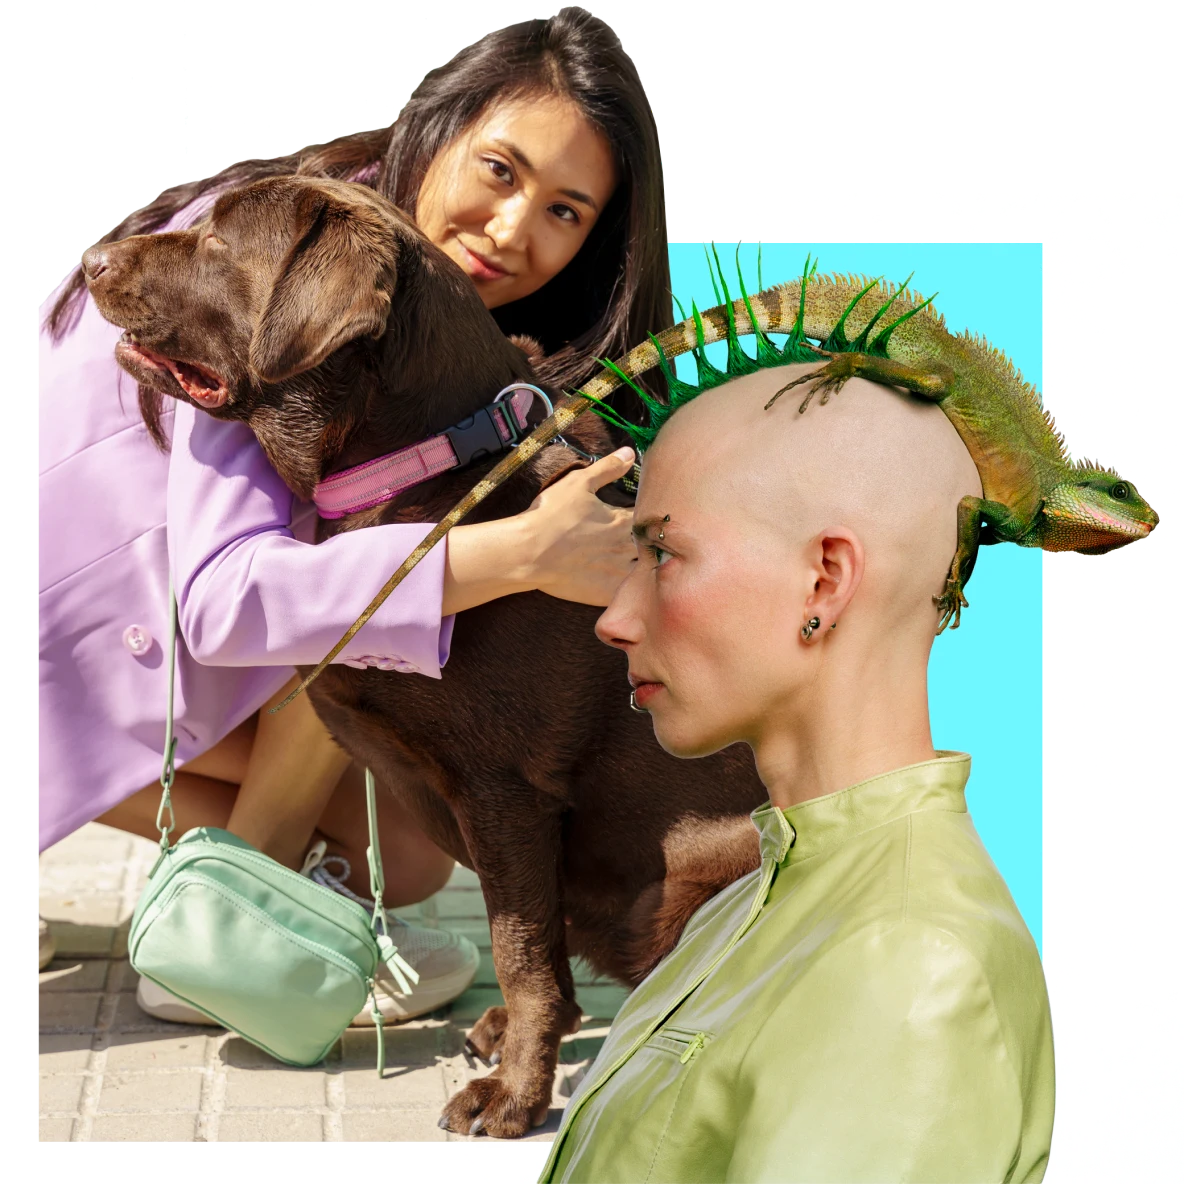 An East Asian woman hugs a large, brown dog on the left. A white woman with spiky hair and an iguana on top of her head is on the right.
